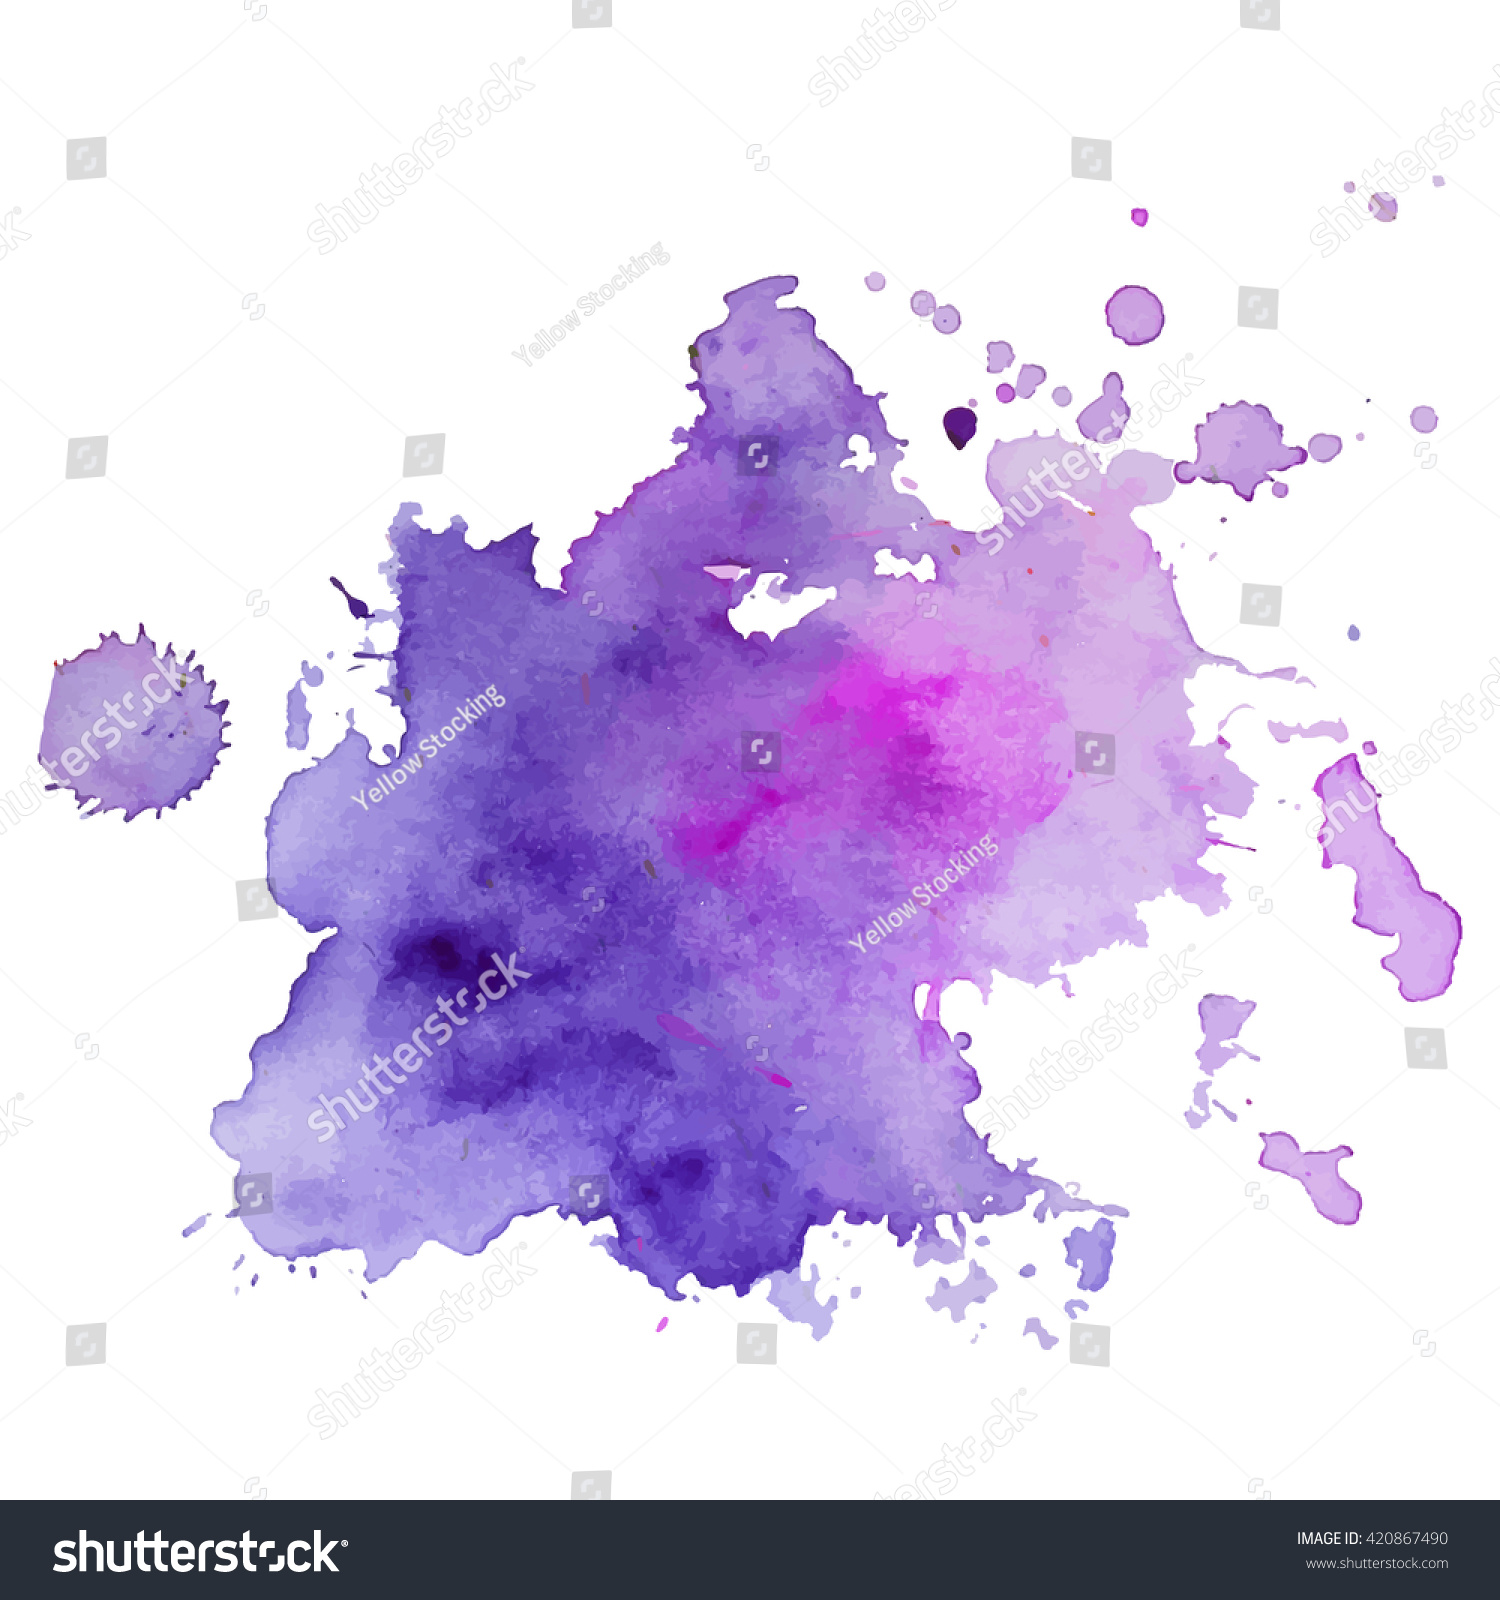 Watercolor Spot Droplets Smudges Stains Splashes Stock Vector (Royalty ...